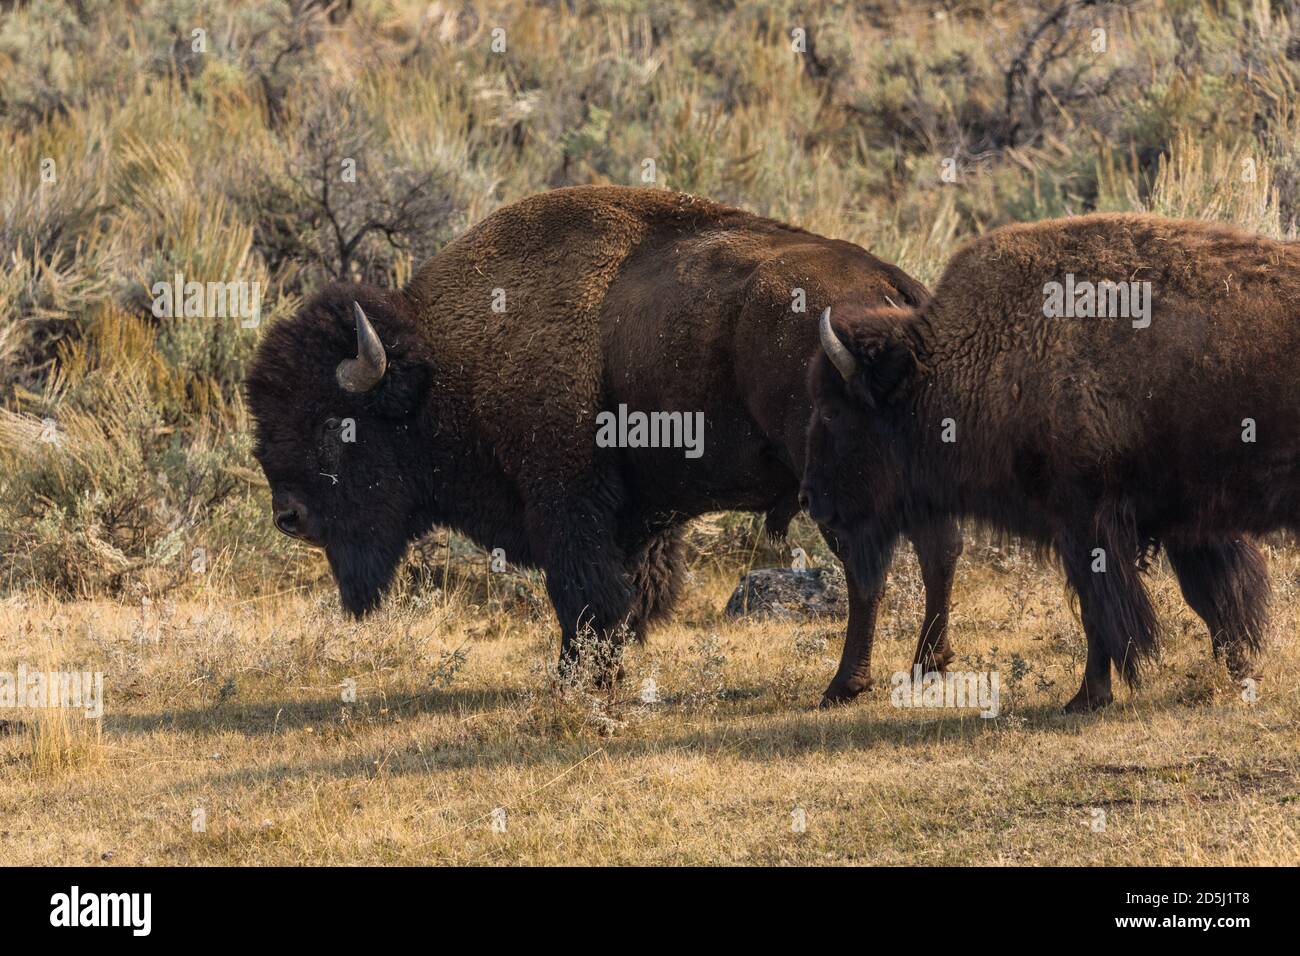 Mature Buffalo Bull High Resolution Stock Photography And Images Alamy